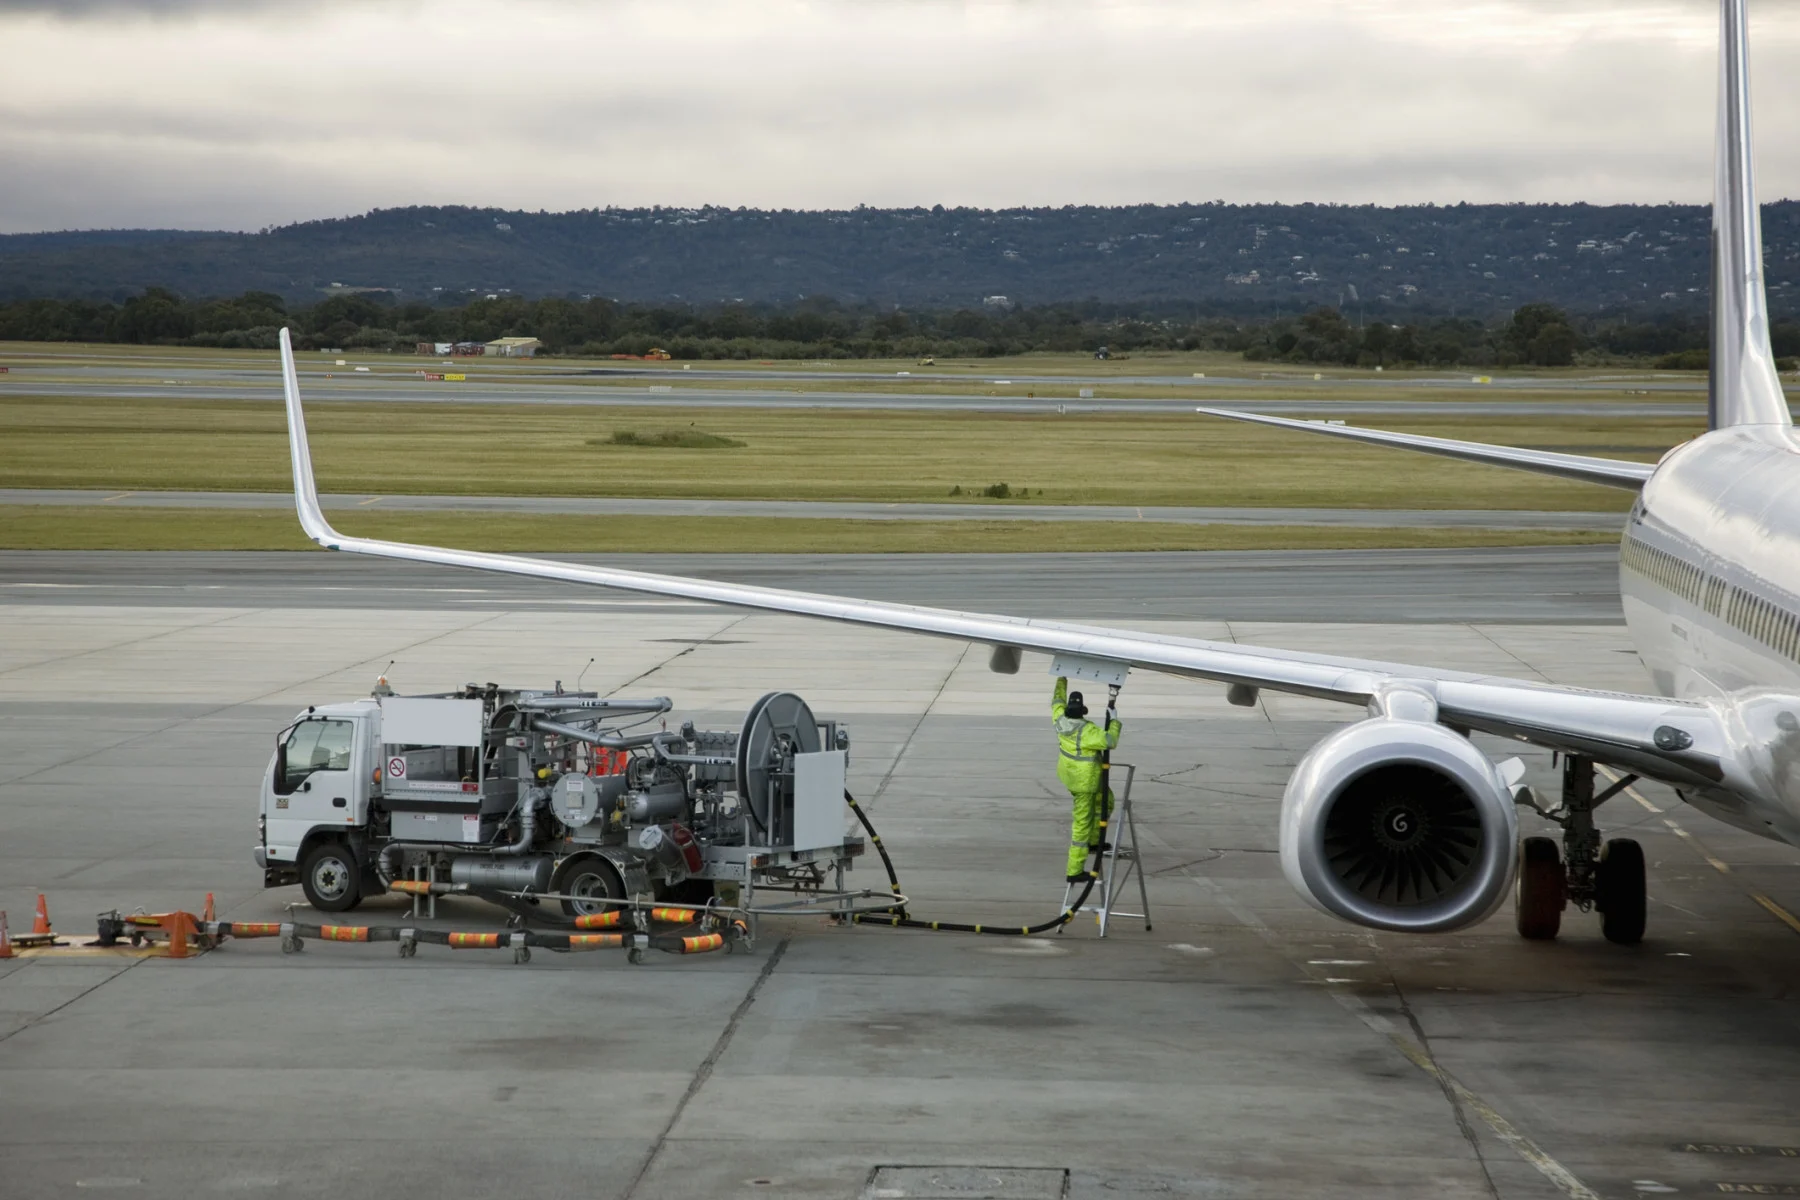 An airplane being refuelled on the tarmac. (Tobias Titz/ fStop/ Getty Images)